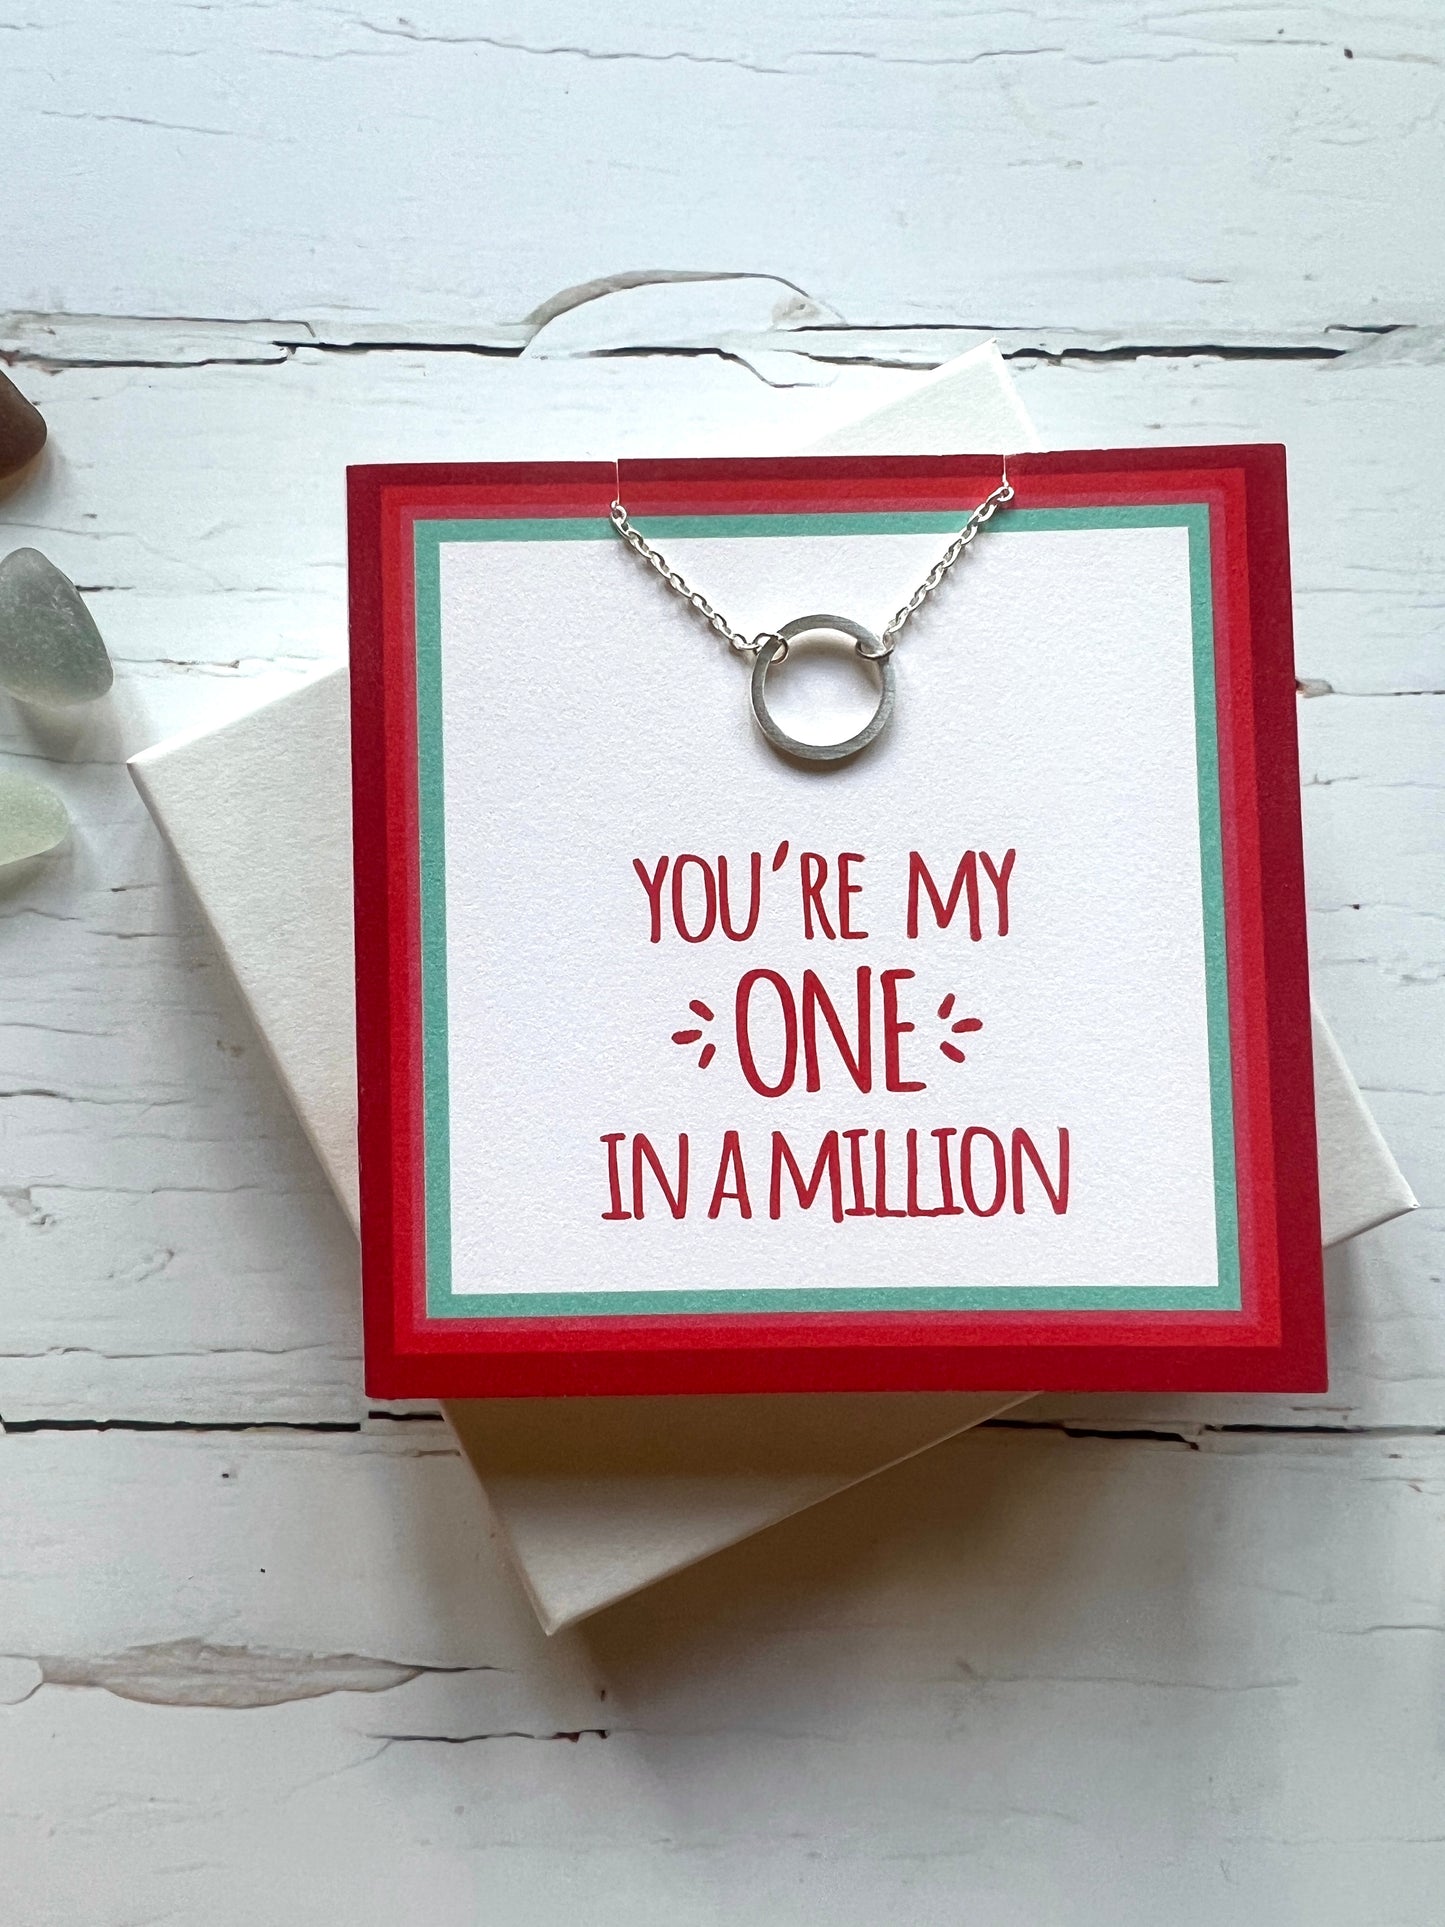 A flat silver ring pendant on a silver chain  mounted on a greetings card which says You're My One in a Million